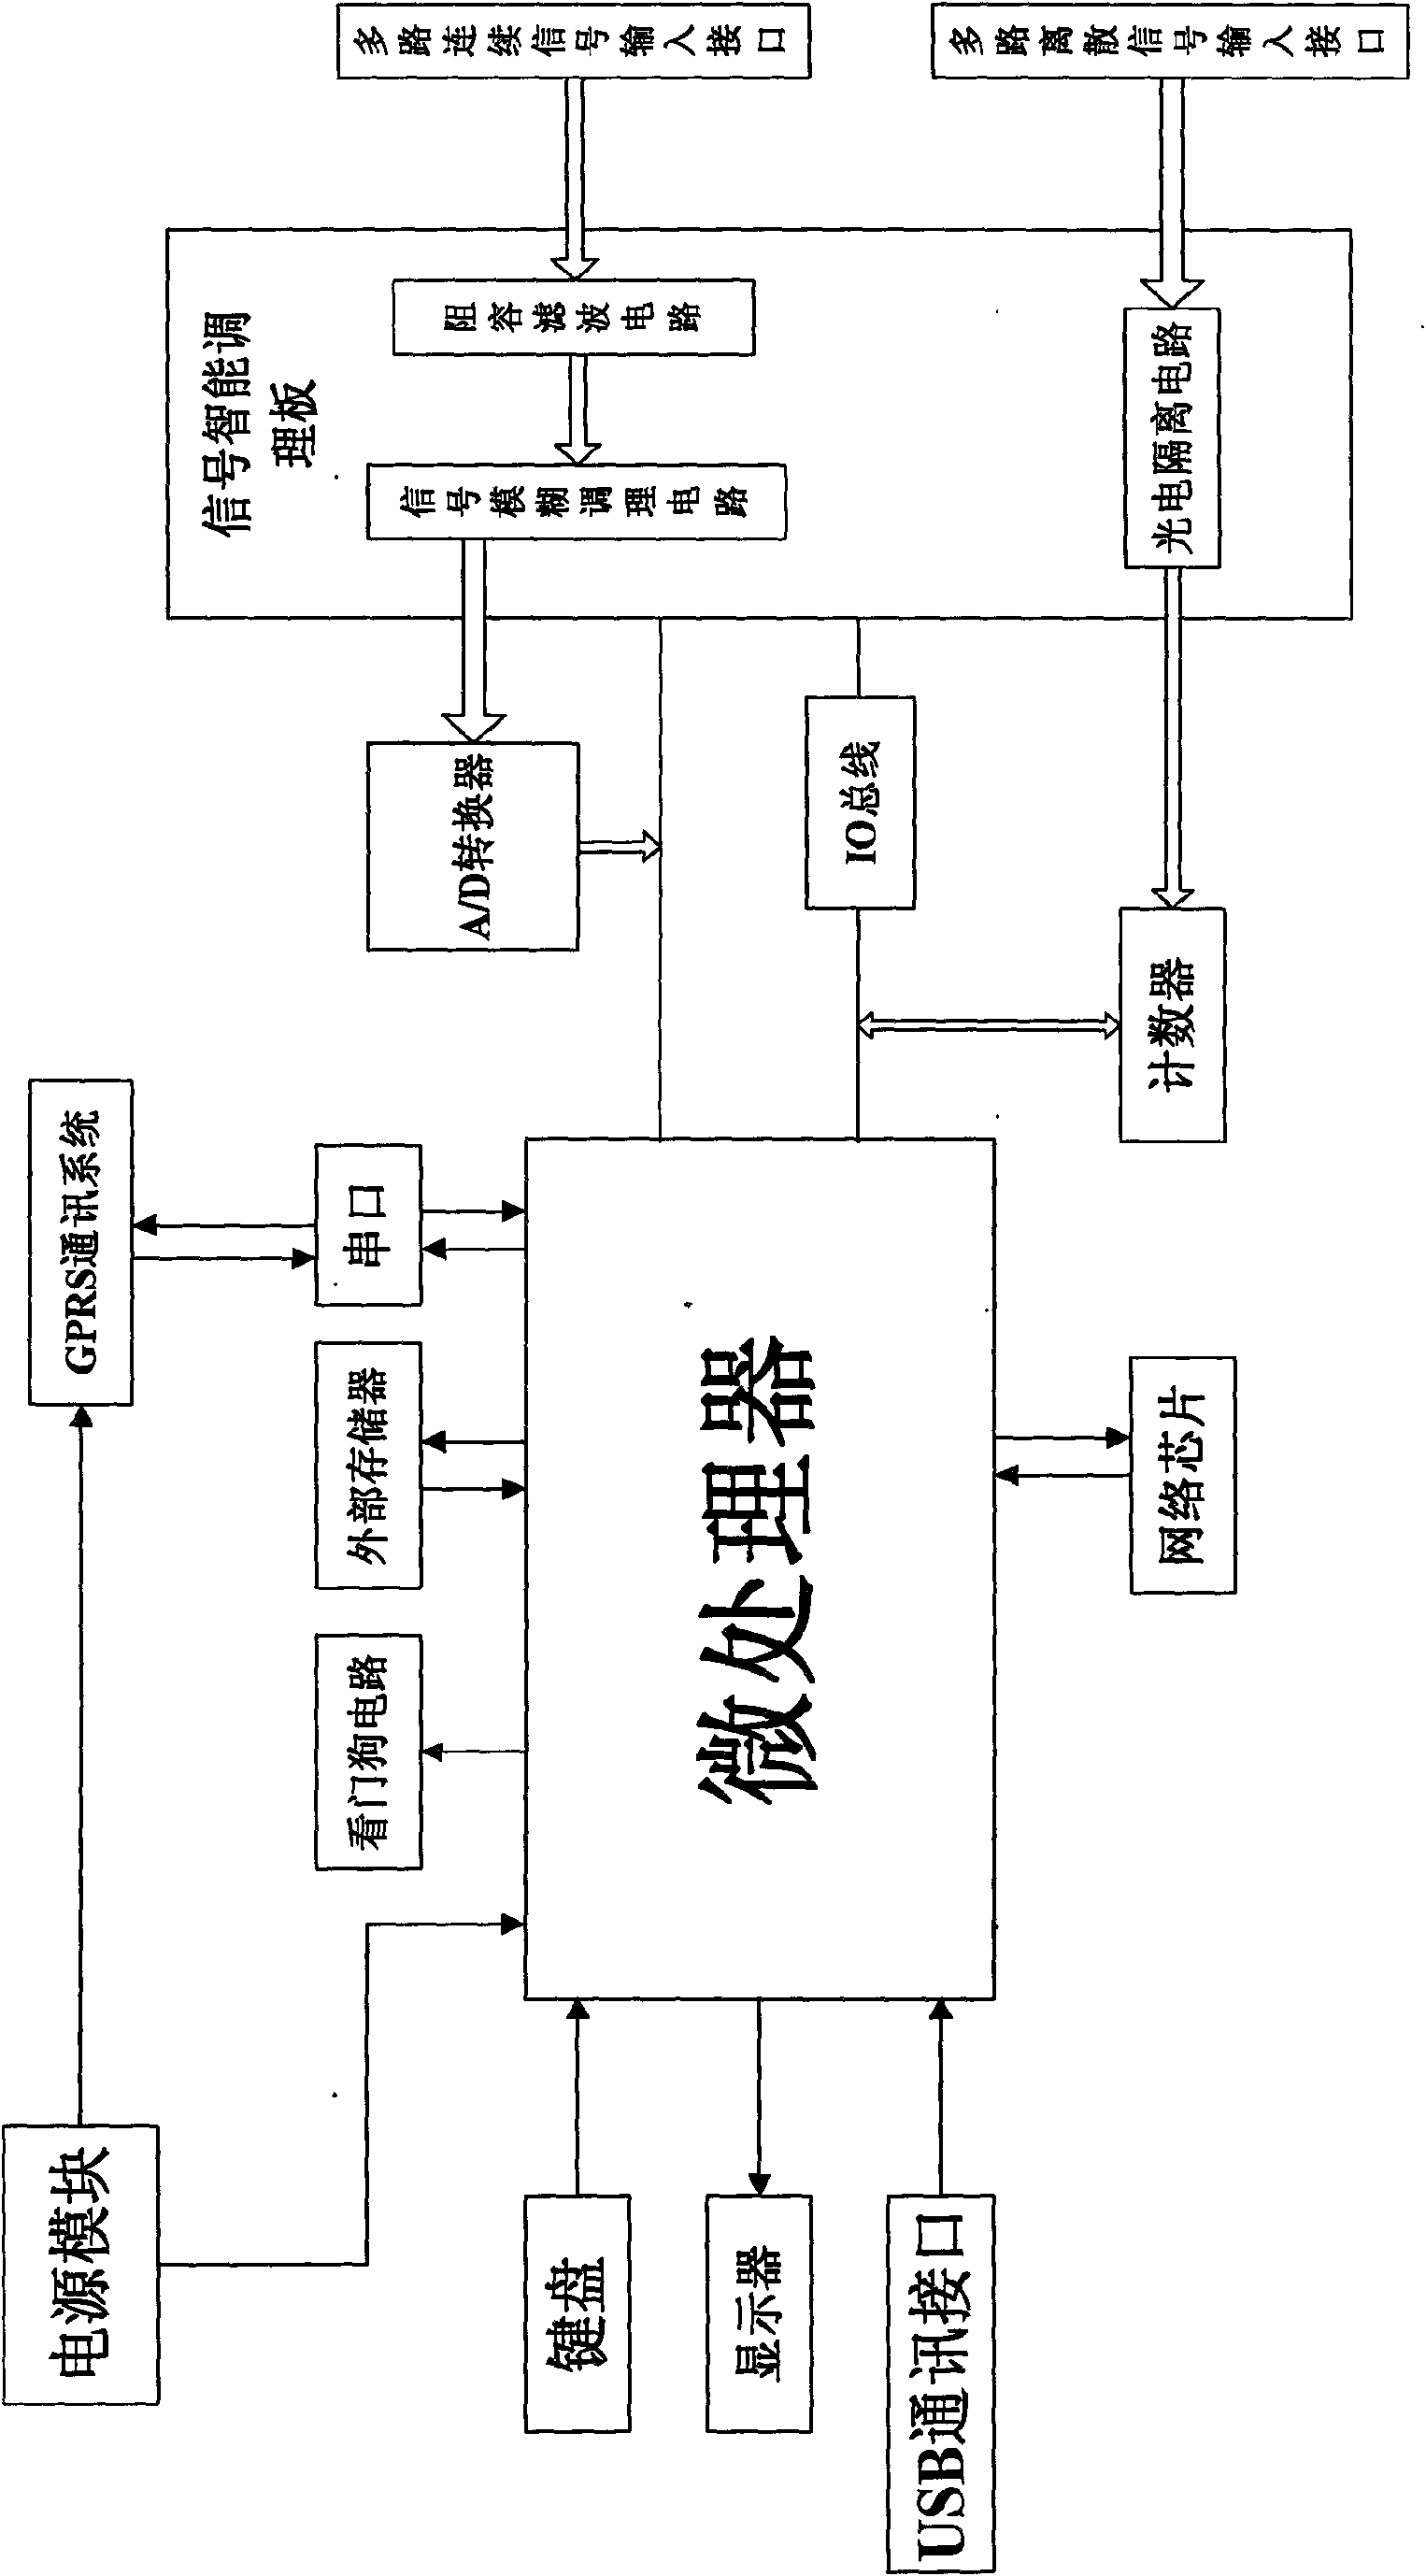 Universal data acquisition unit and data acquisition method thereof